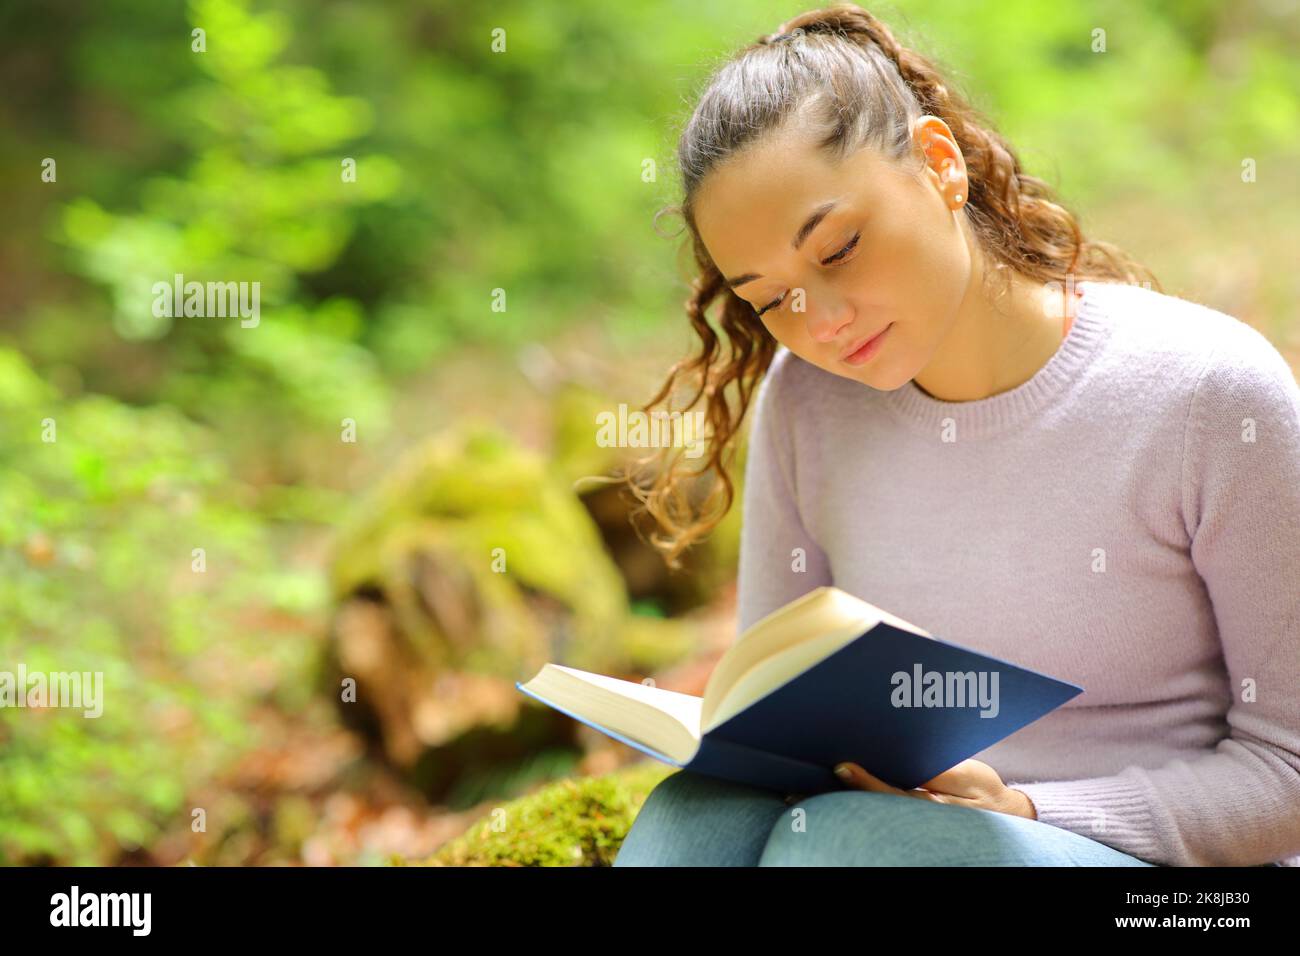 Concentrated woman reading a paper book sitting in nature Stock Photo